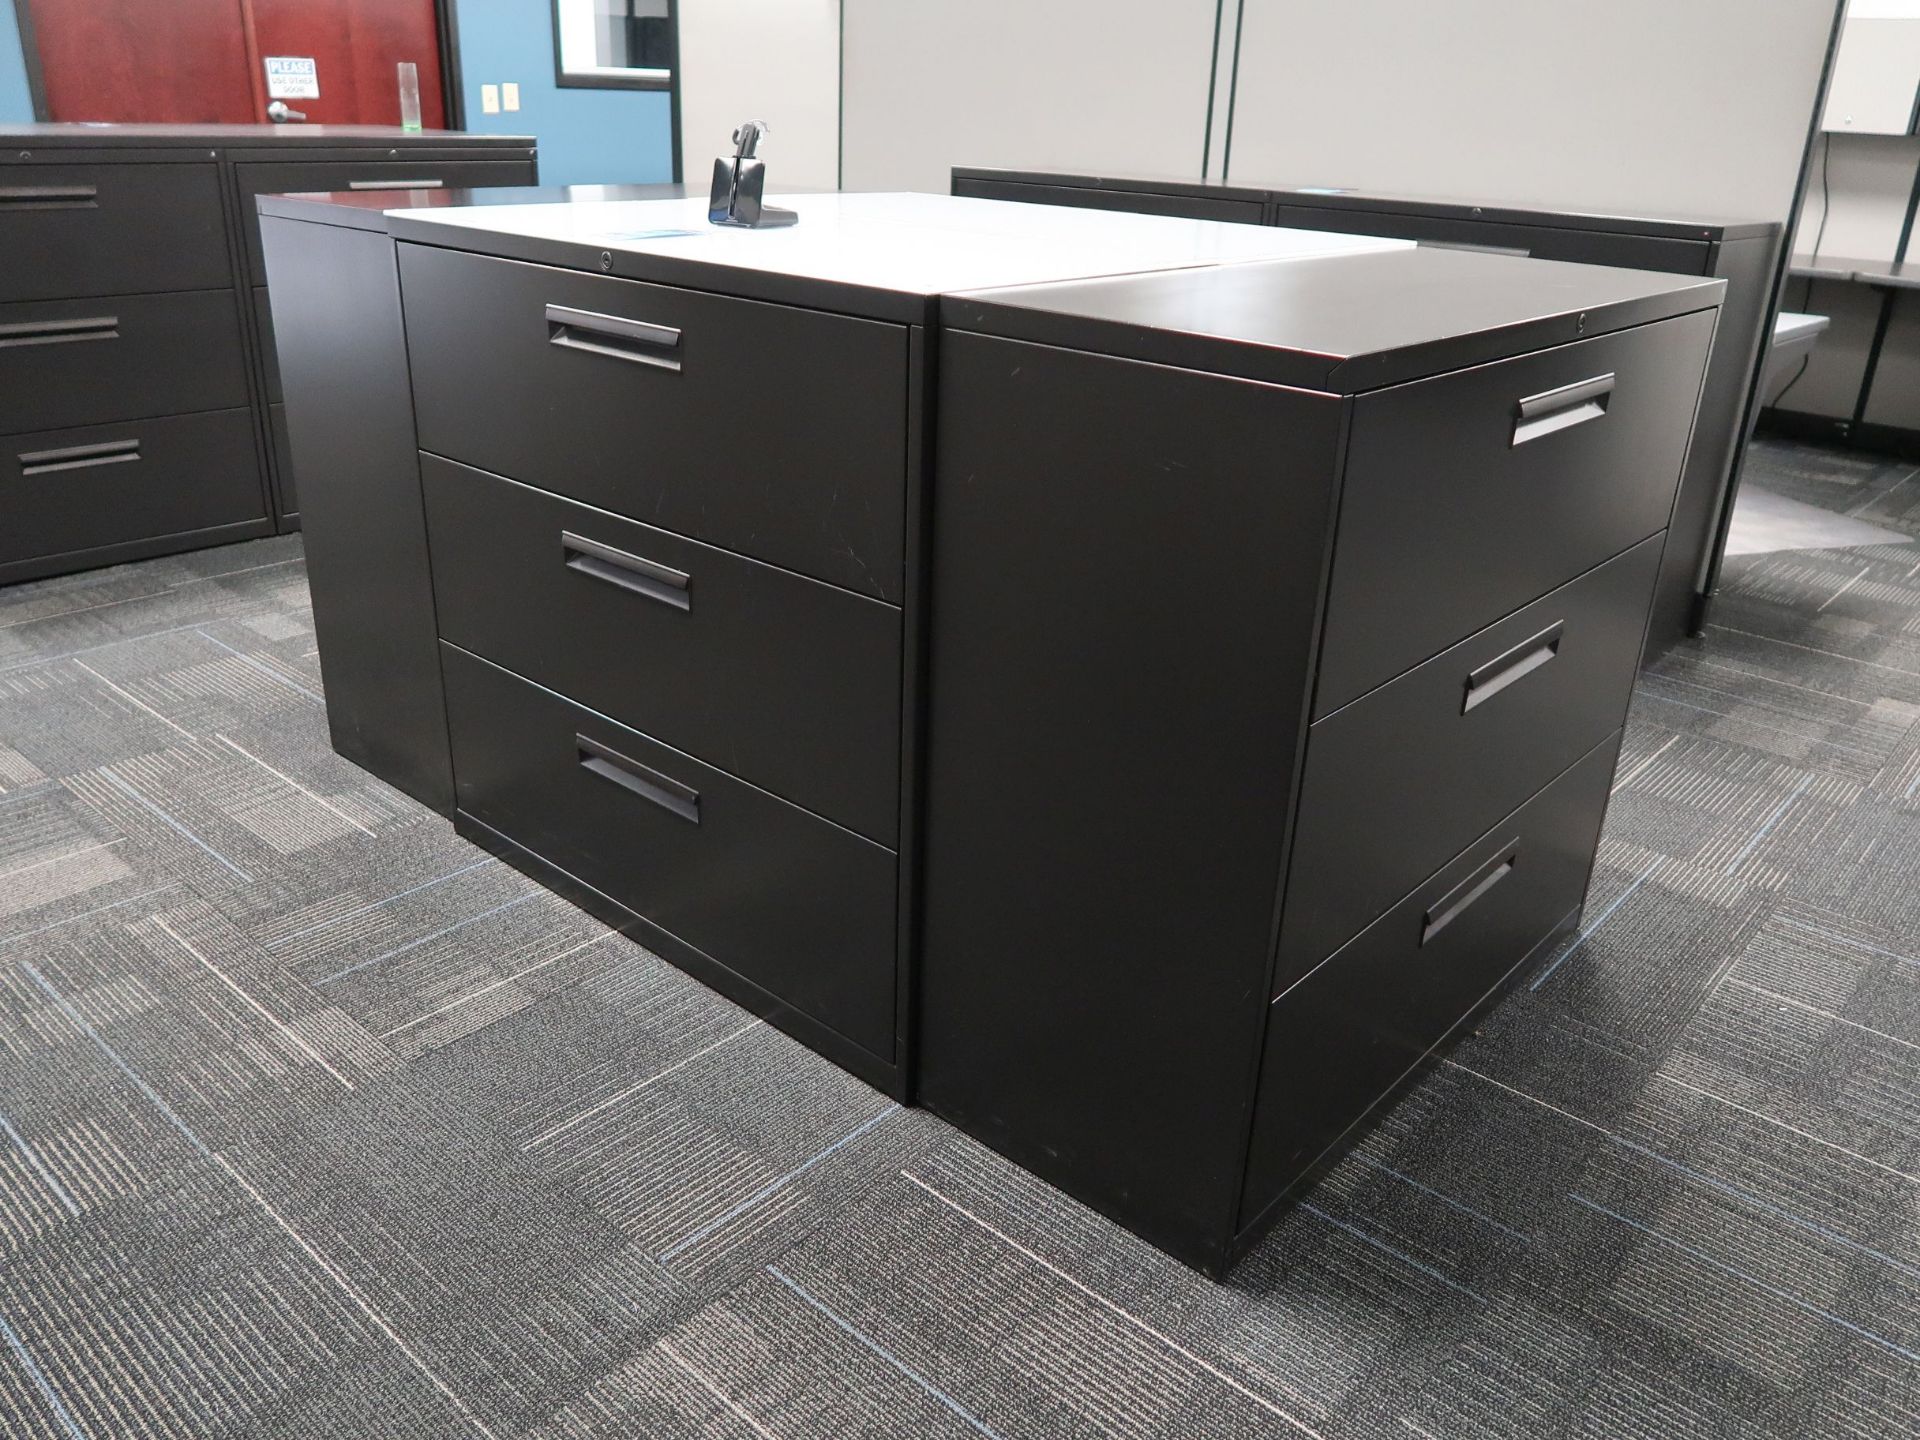 42" WIDE THREE-DRAWER BLACK LATERAL FILE CABINETS